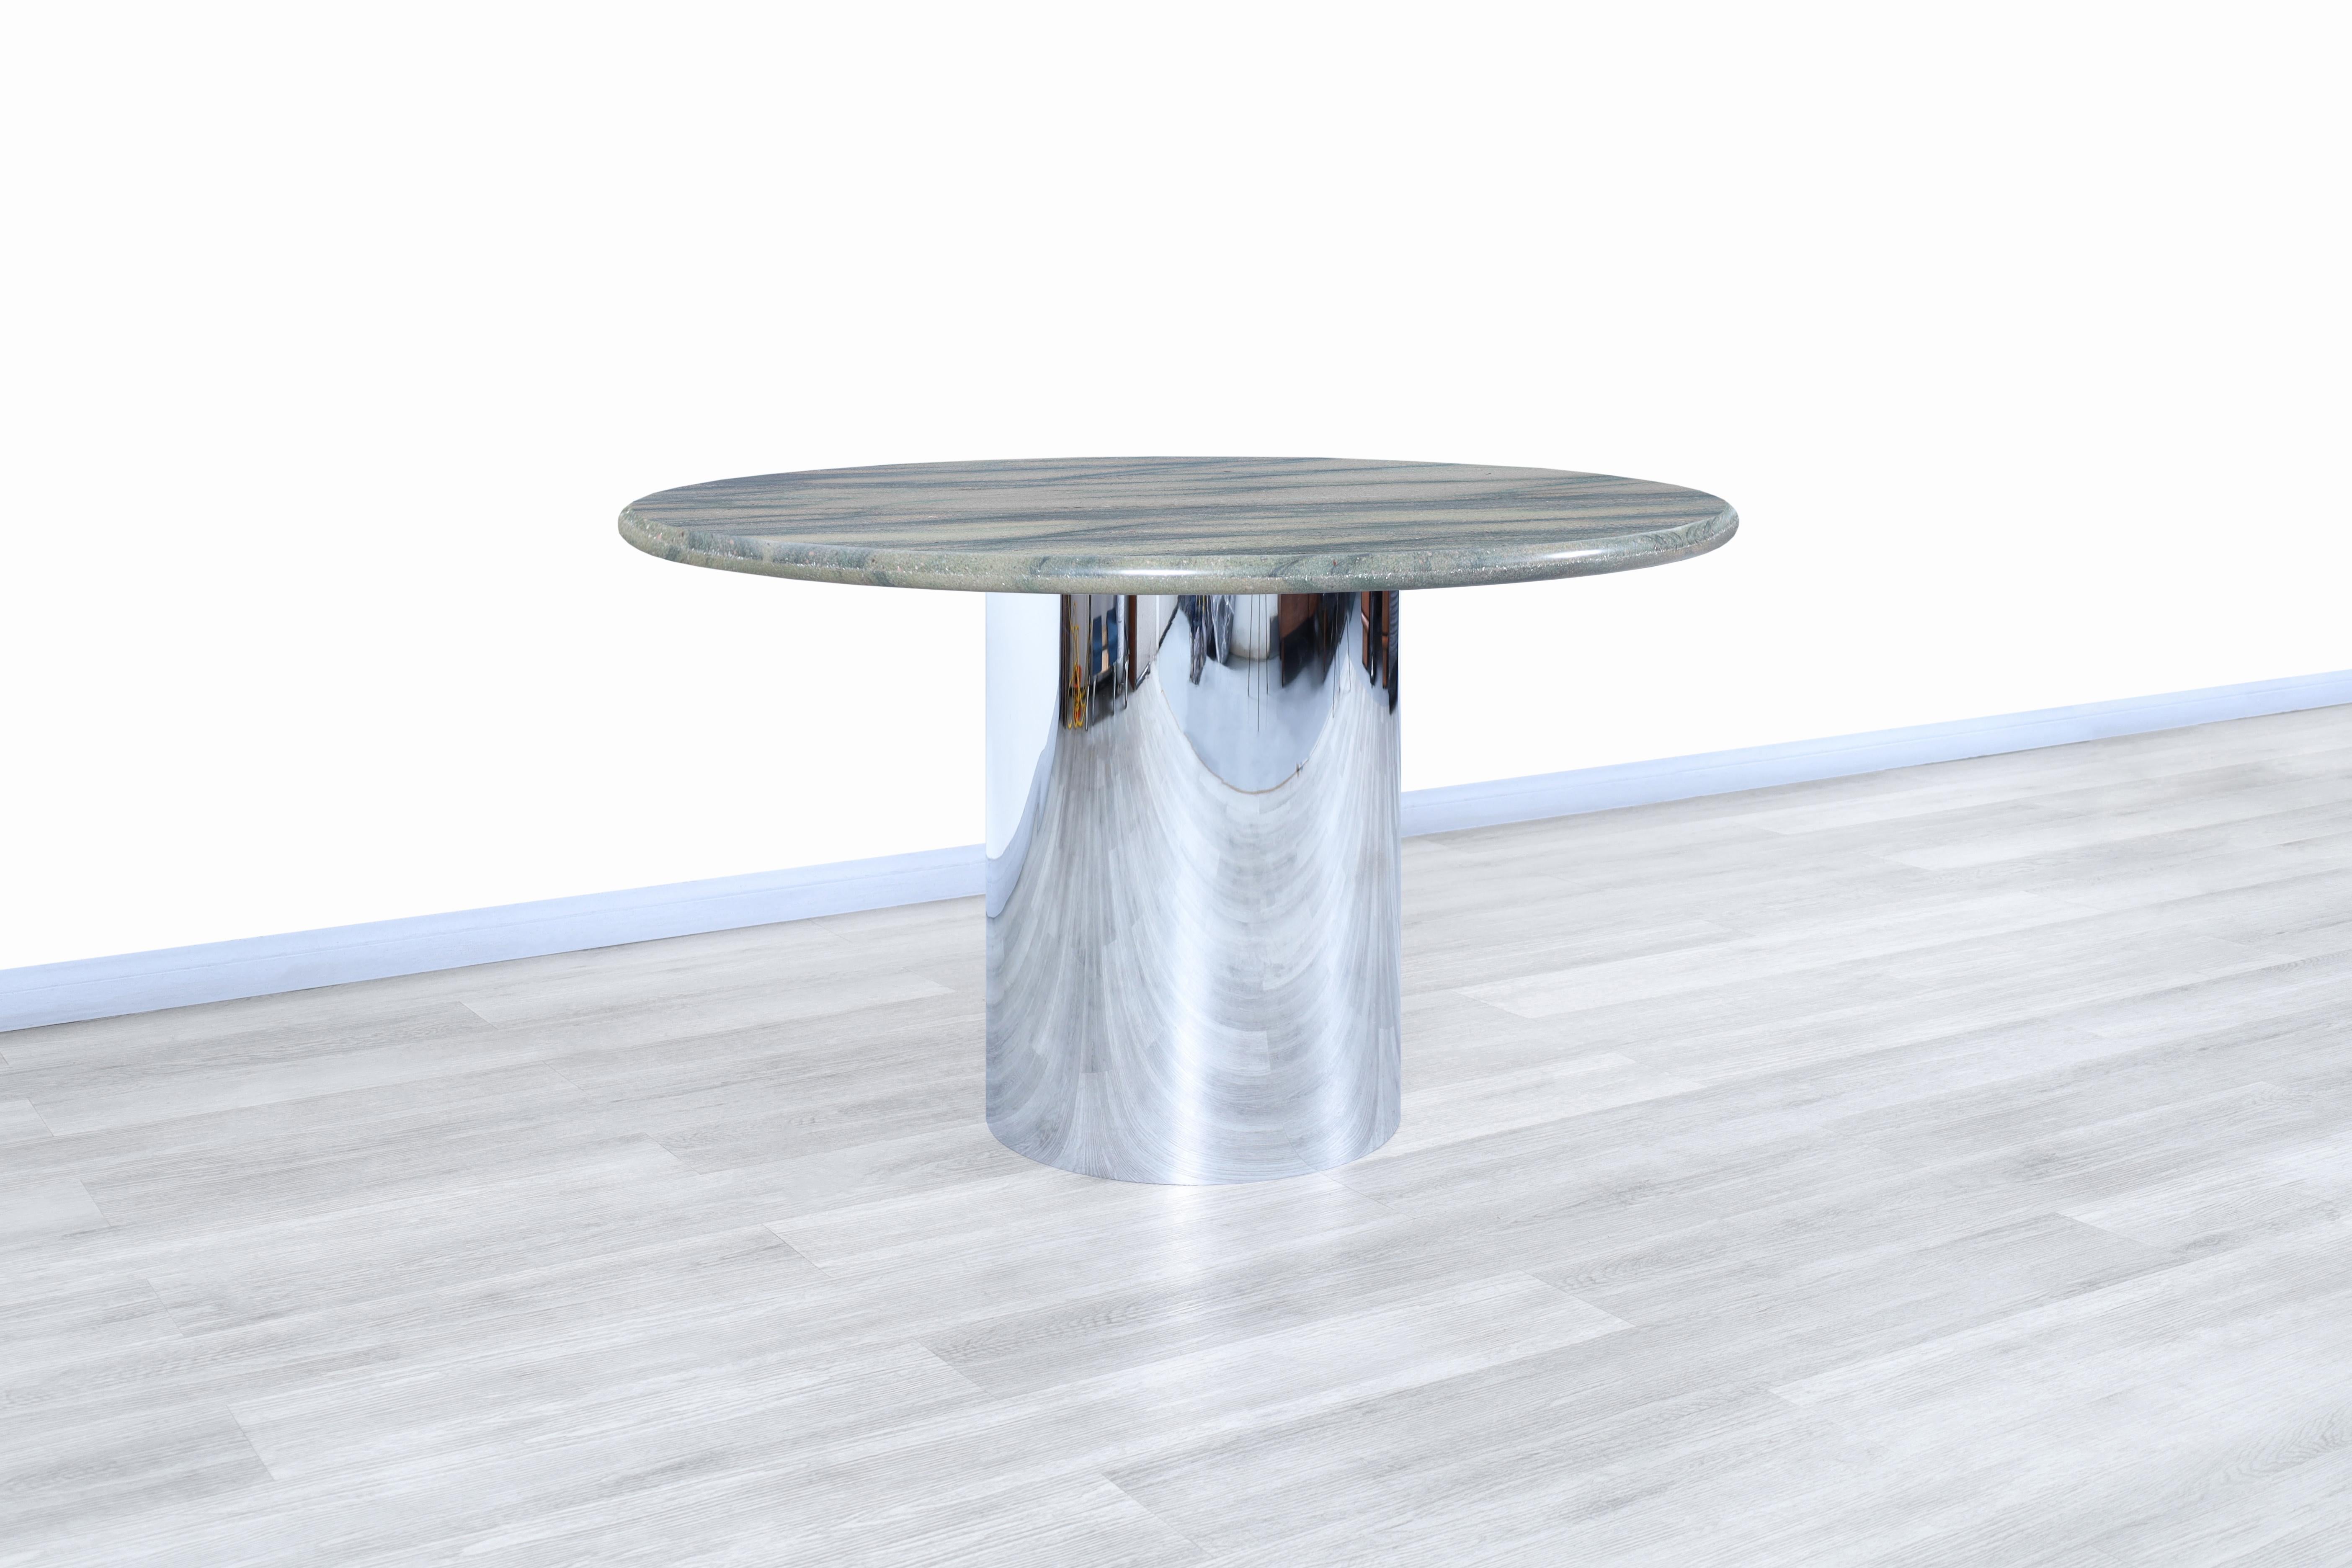 Vintage Marble and Stainless Steel Round Dining Table In Excellent Condition For Sale In North Hollywood, CA